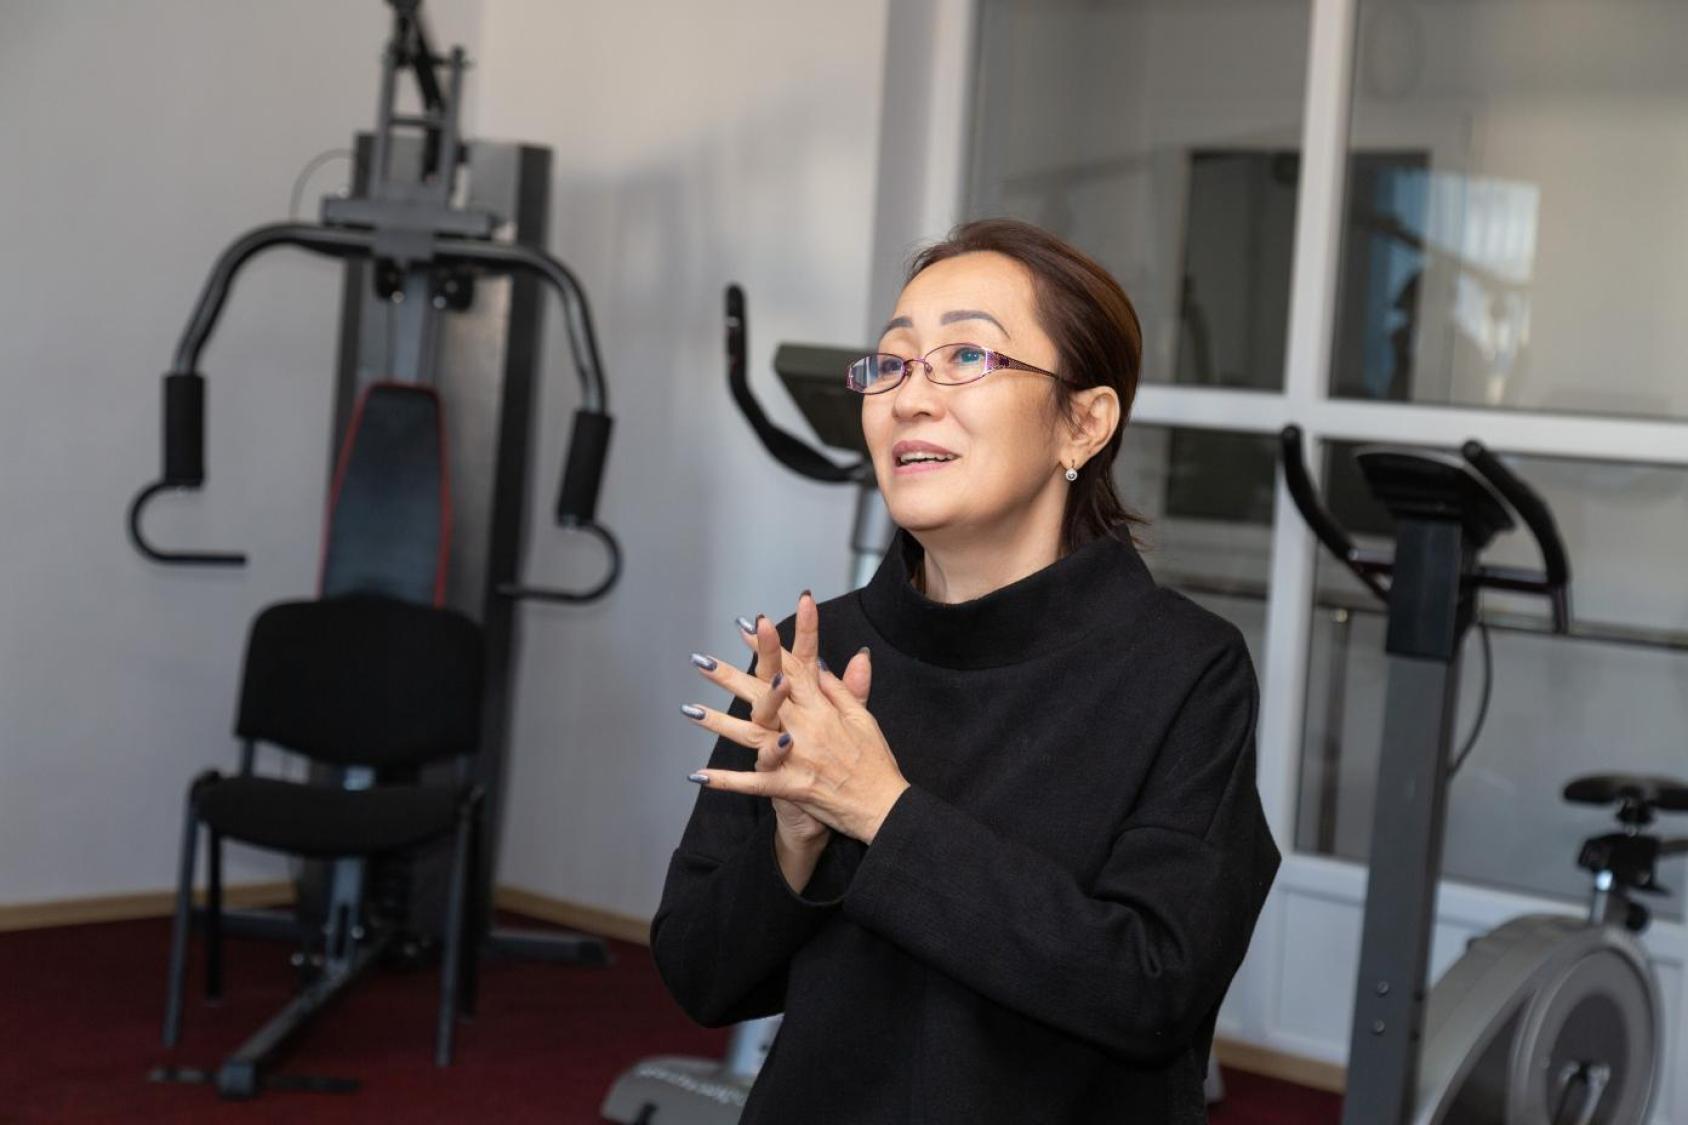 Woman in a black shirt in a gymnasium